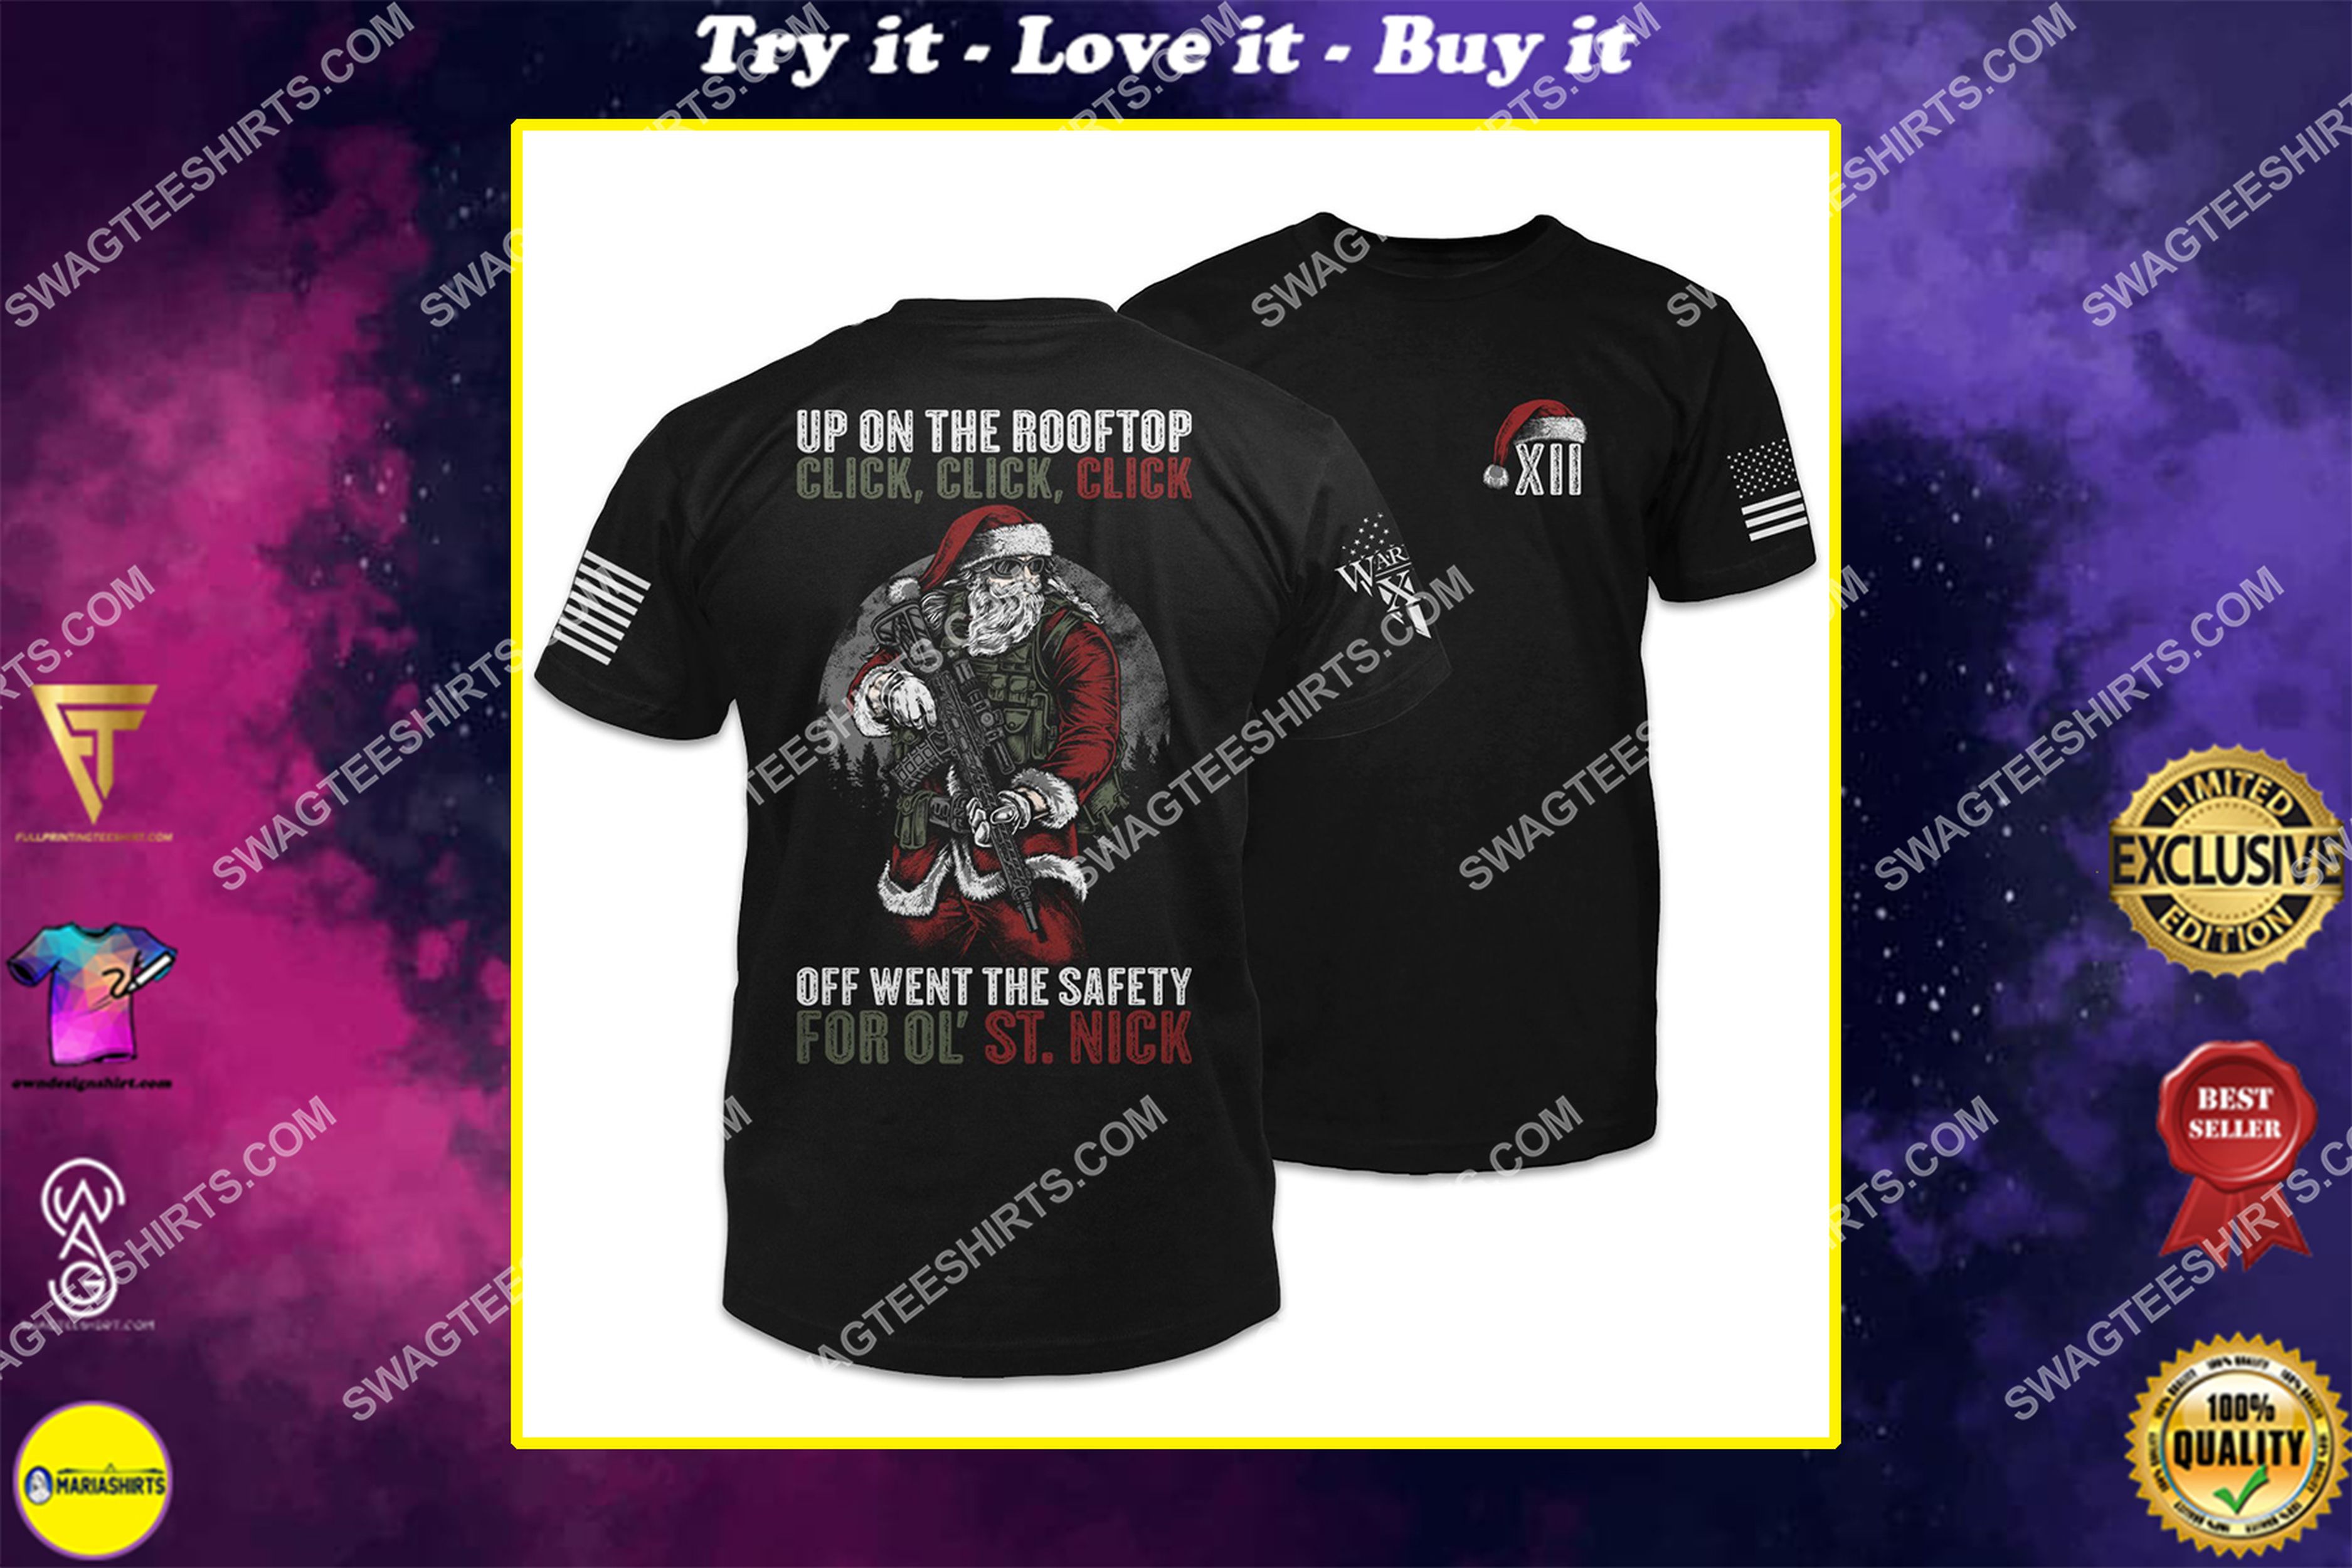 [special edition] up on the rooftop off went the safety for ol’ st nick santa on patrol shirt – maria